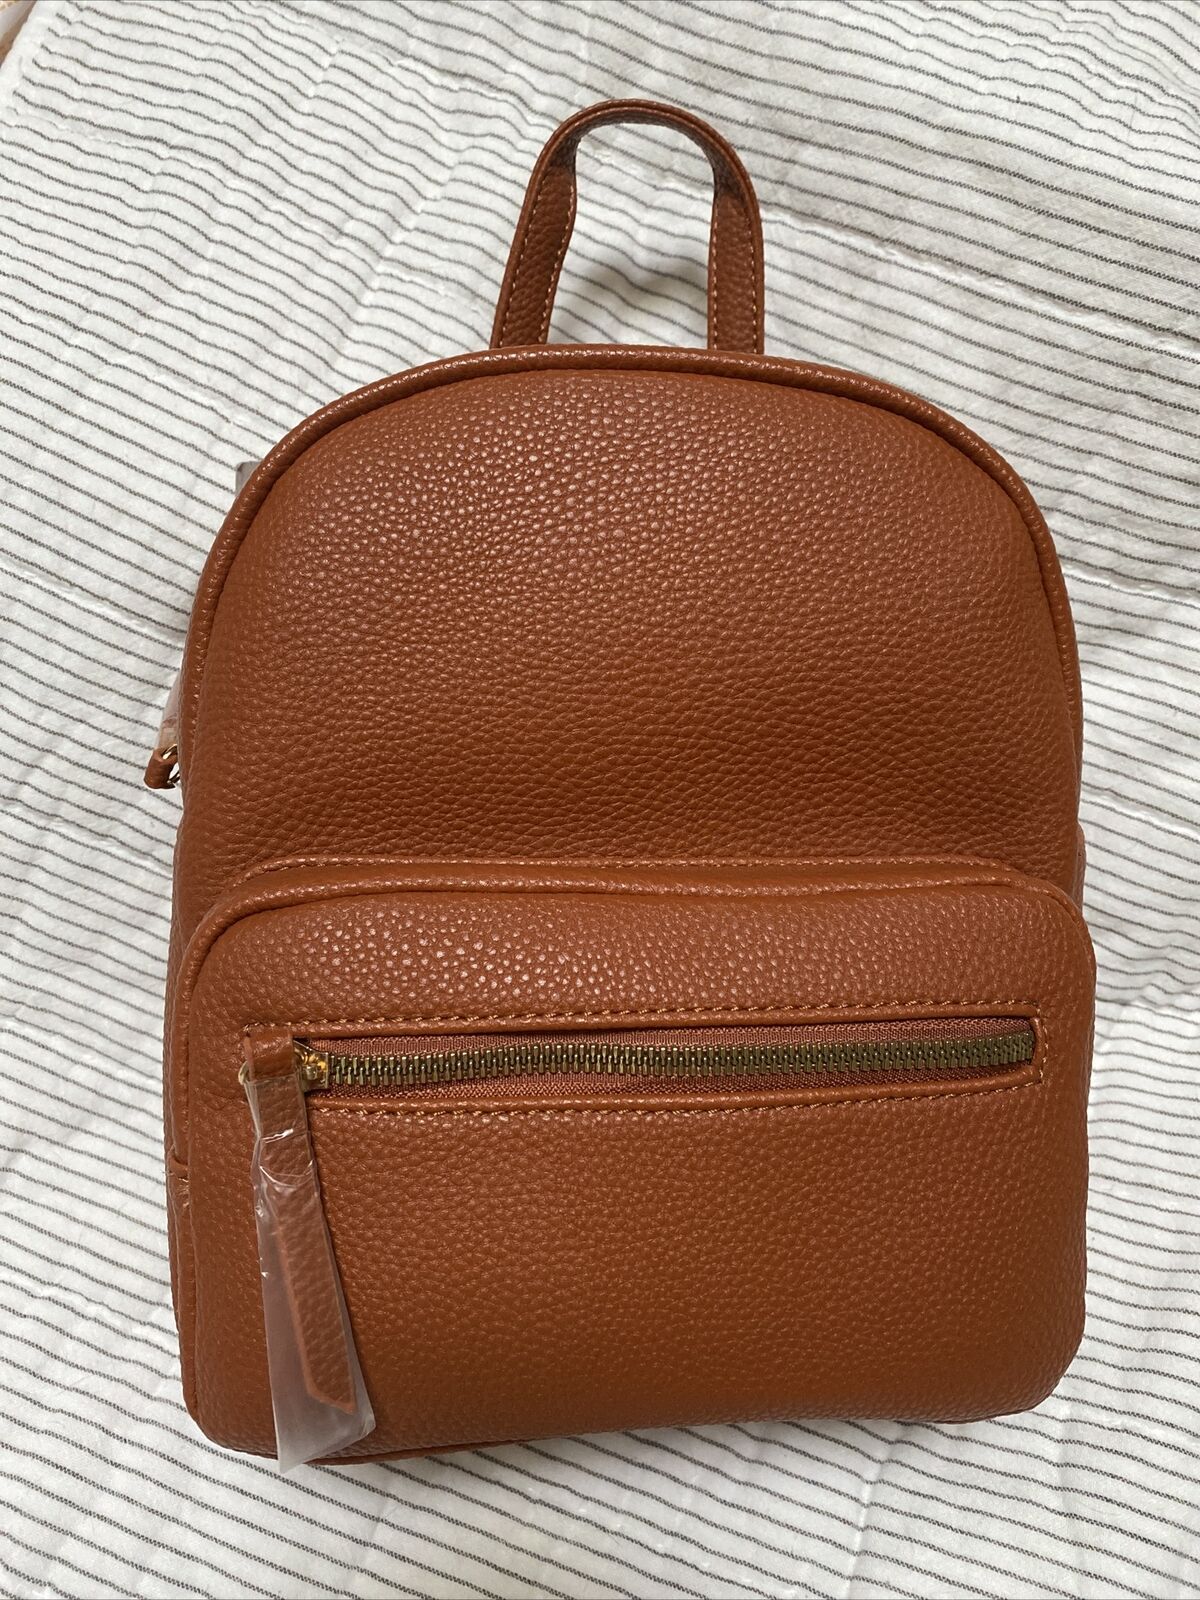 summer & rose packpack, brown pebble vegan leather, Classic, New!